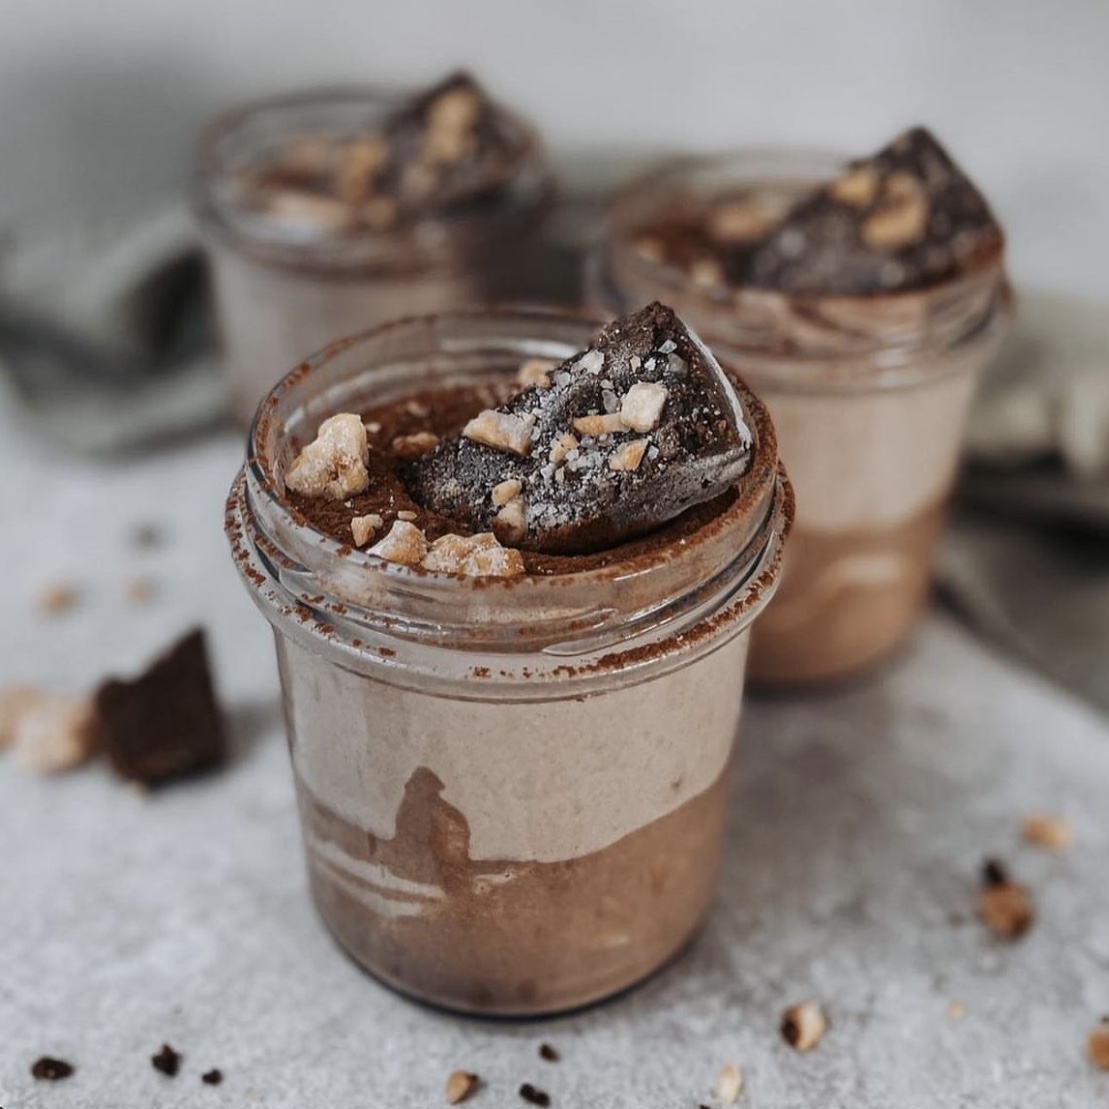 Truffle Cheesecake in chocolate and caramelized nuts in a jar